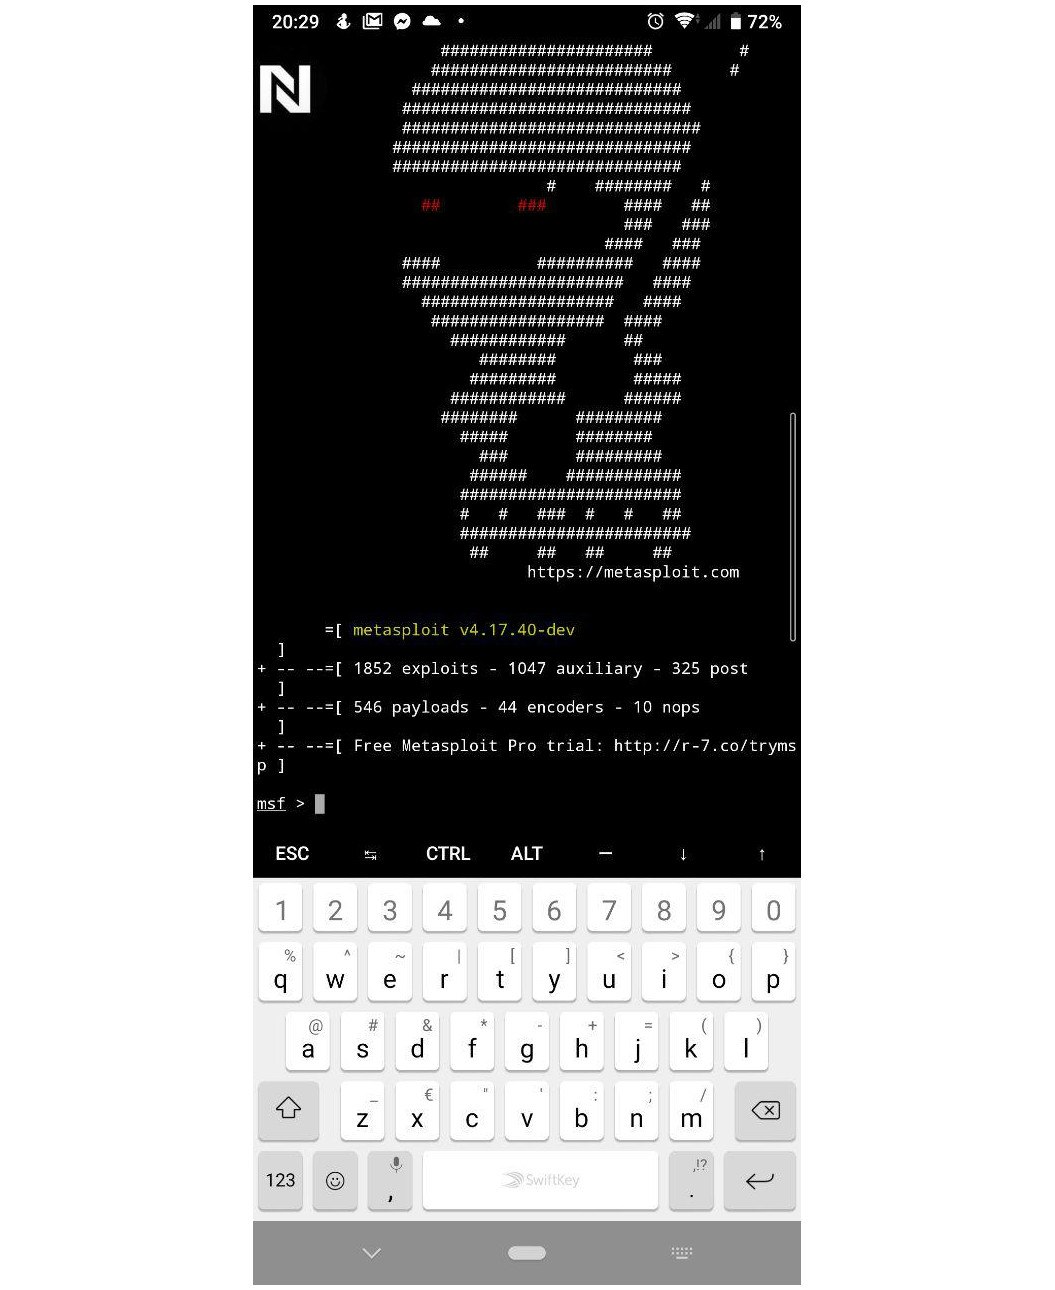 If you want to immerse yourself more about how to hack with Android, then Termux is a very good 'App' to use an discover.